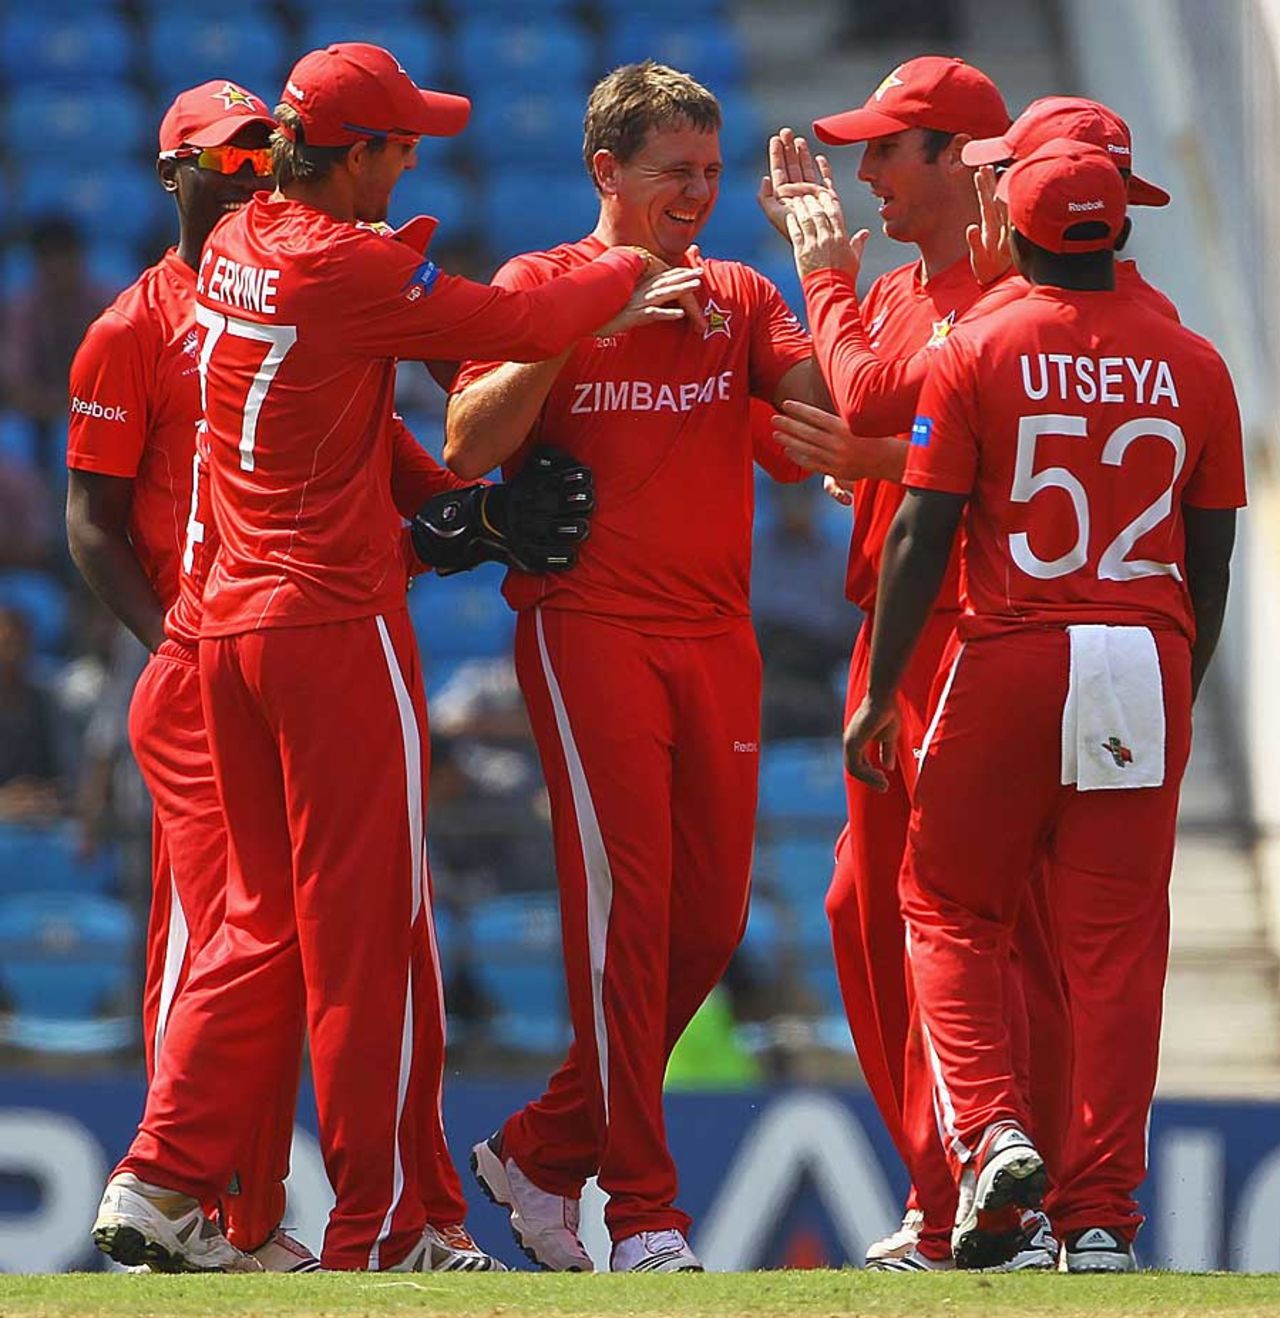 Ray Price pegged back Canada with early wickets, Canada v Zimbabwe, World Cup 2011, Group A, Nagpur, February 28, 2011